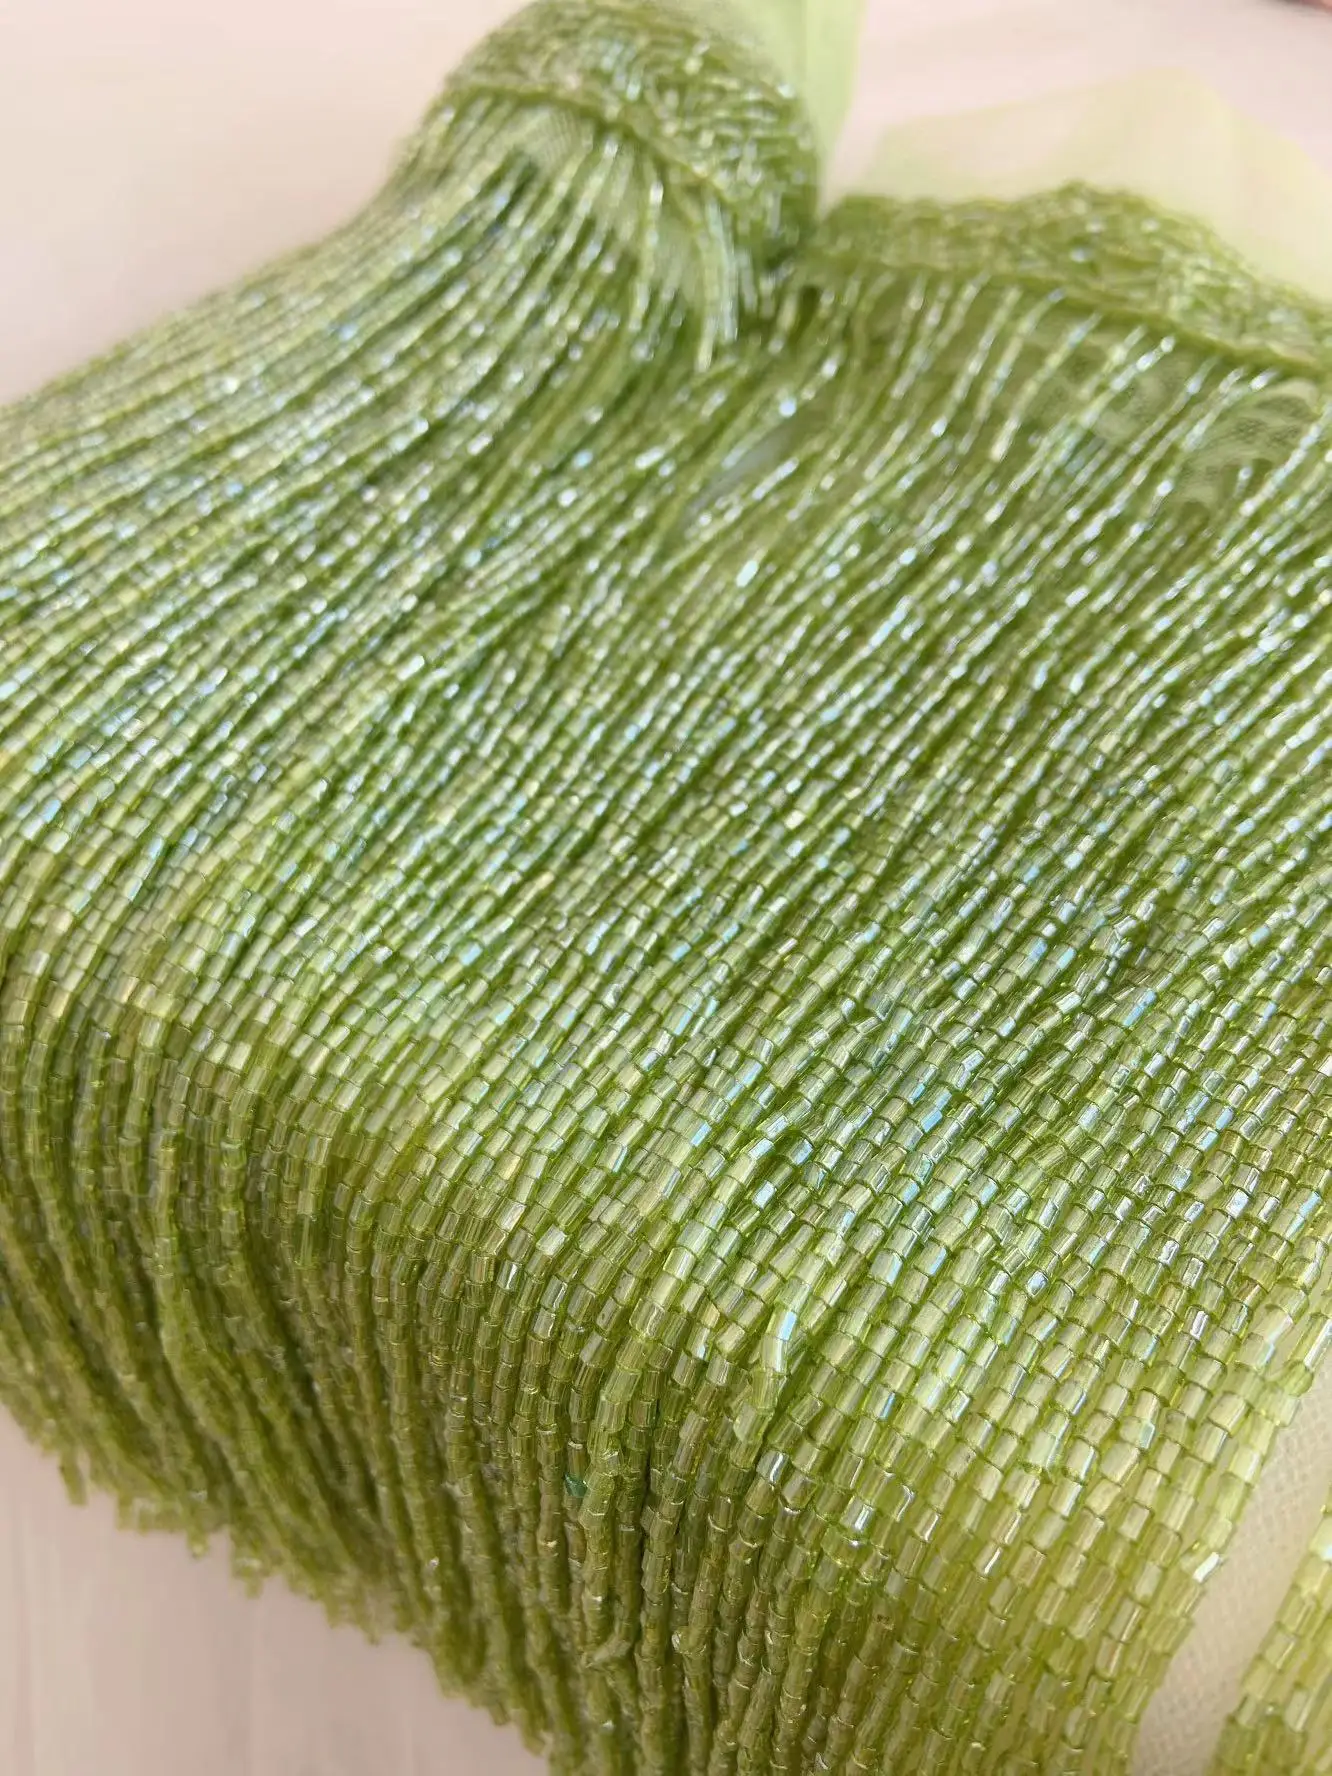 

2 Yards Light Green Heavy Bead Fringe Trim Seed Tassel Tape for Sparkling Dance Decor,Haute Couture,Bags Sewing,Millinery Crafts